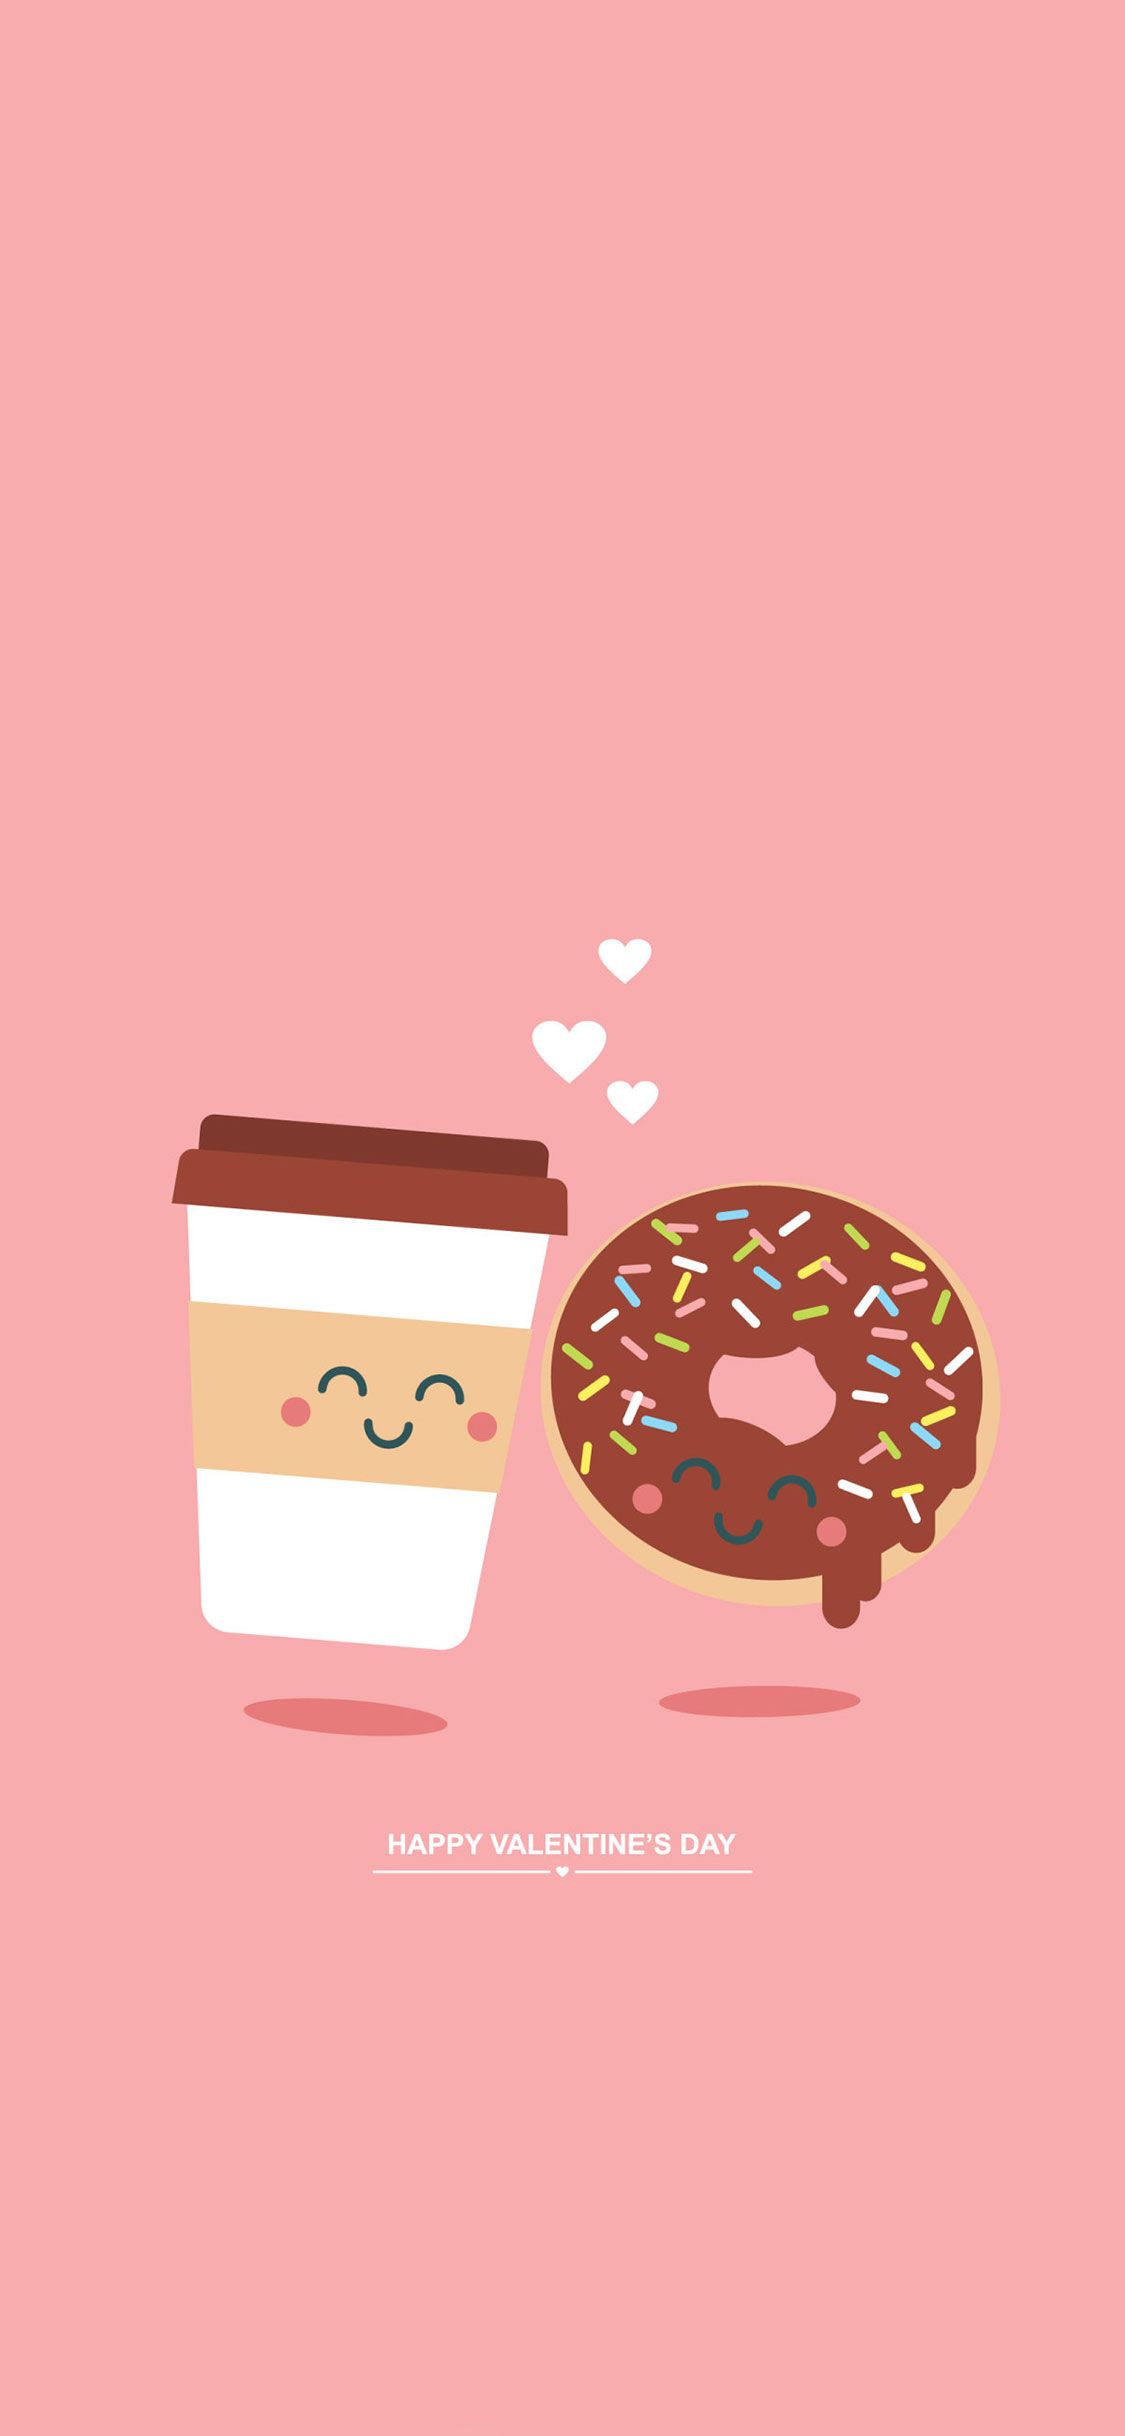 Cute Donuts iPhone Wallpaper Free Cute Donuts iPhone Background